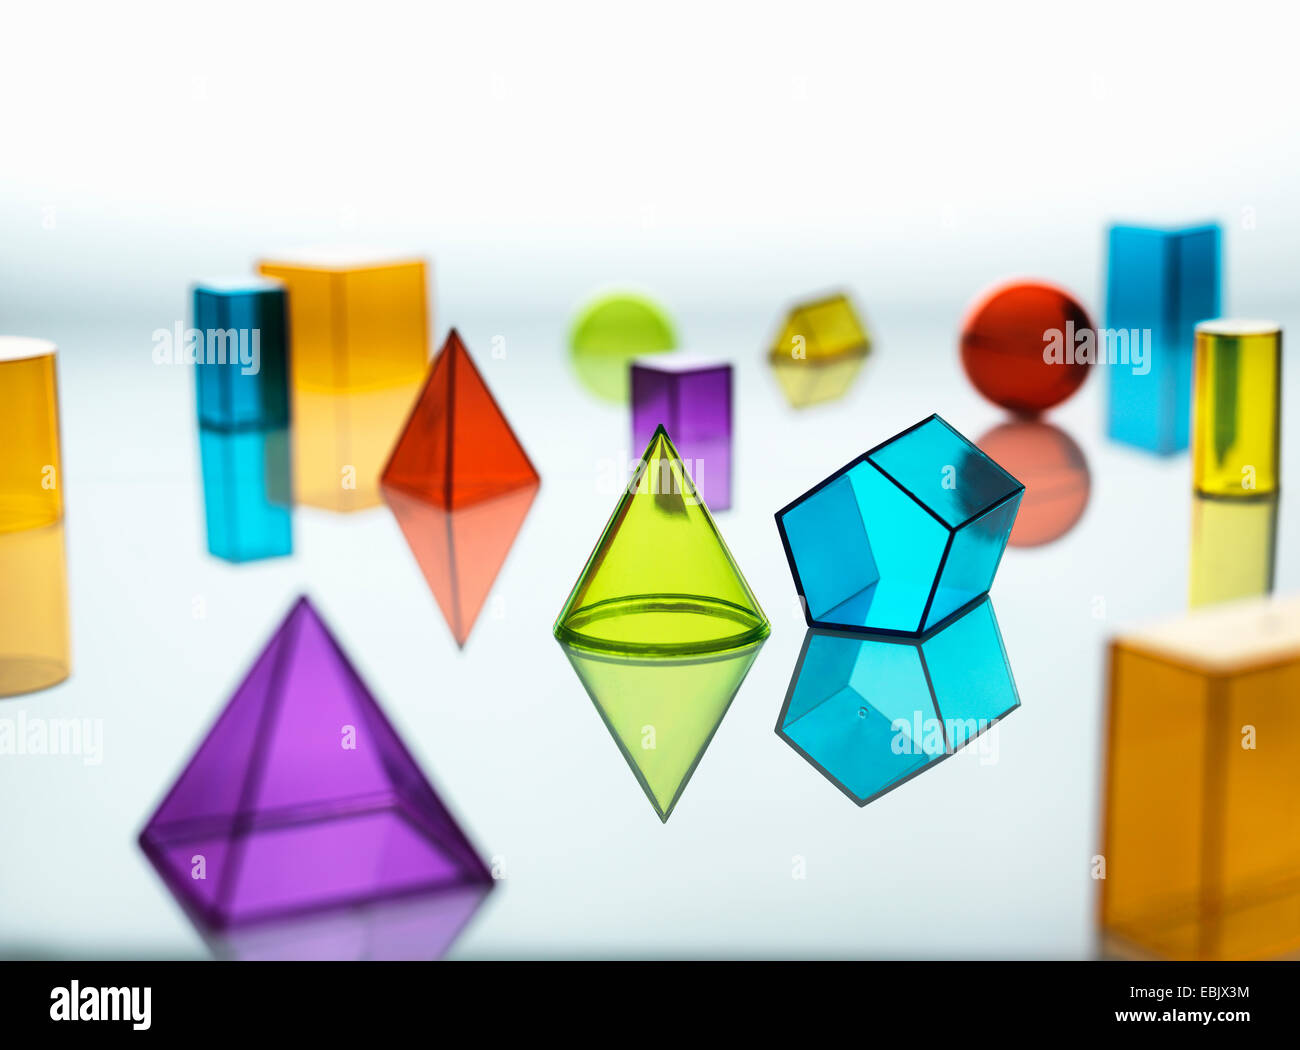 Large group of various multi colored geometric shapes Stock Photo